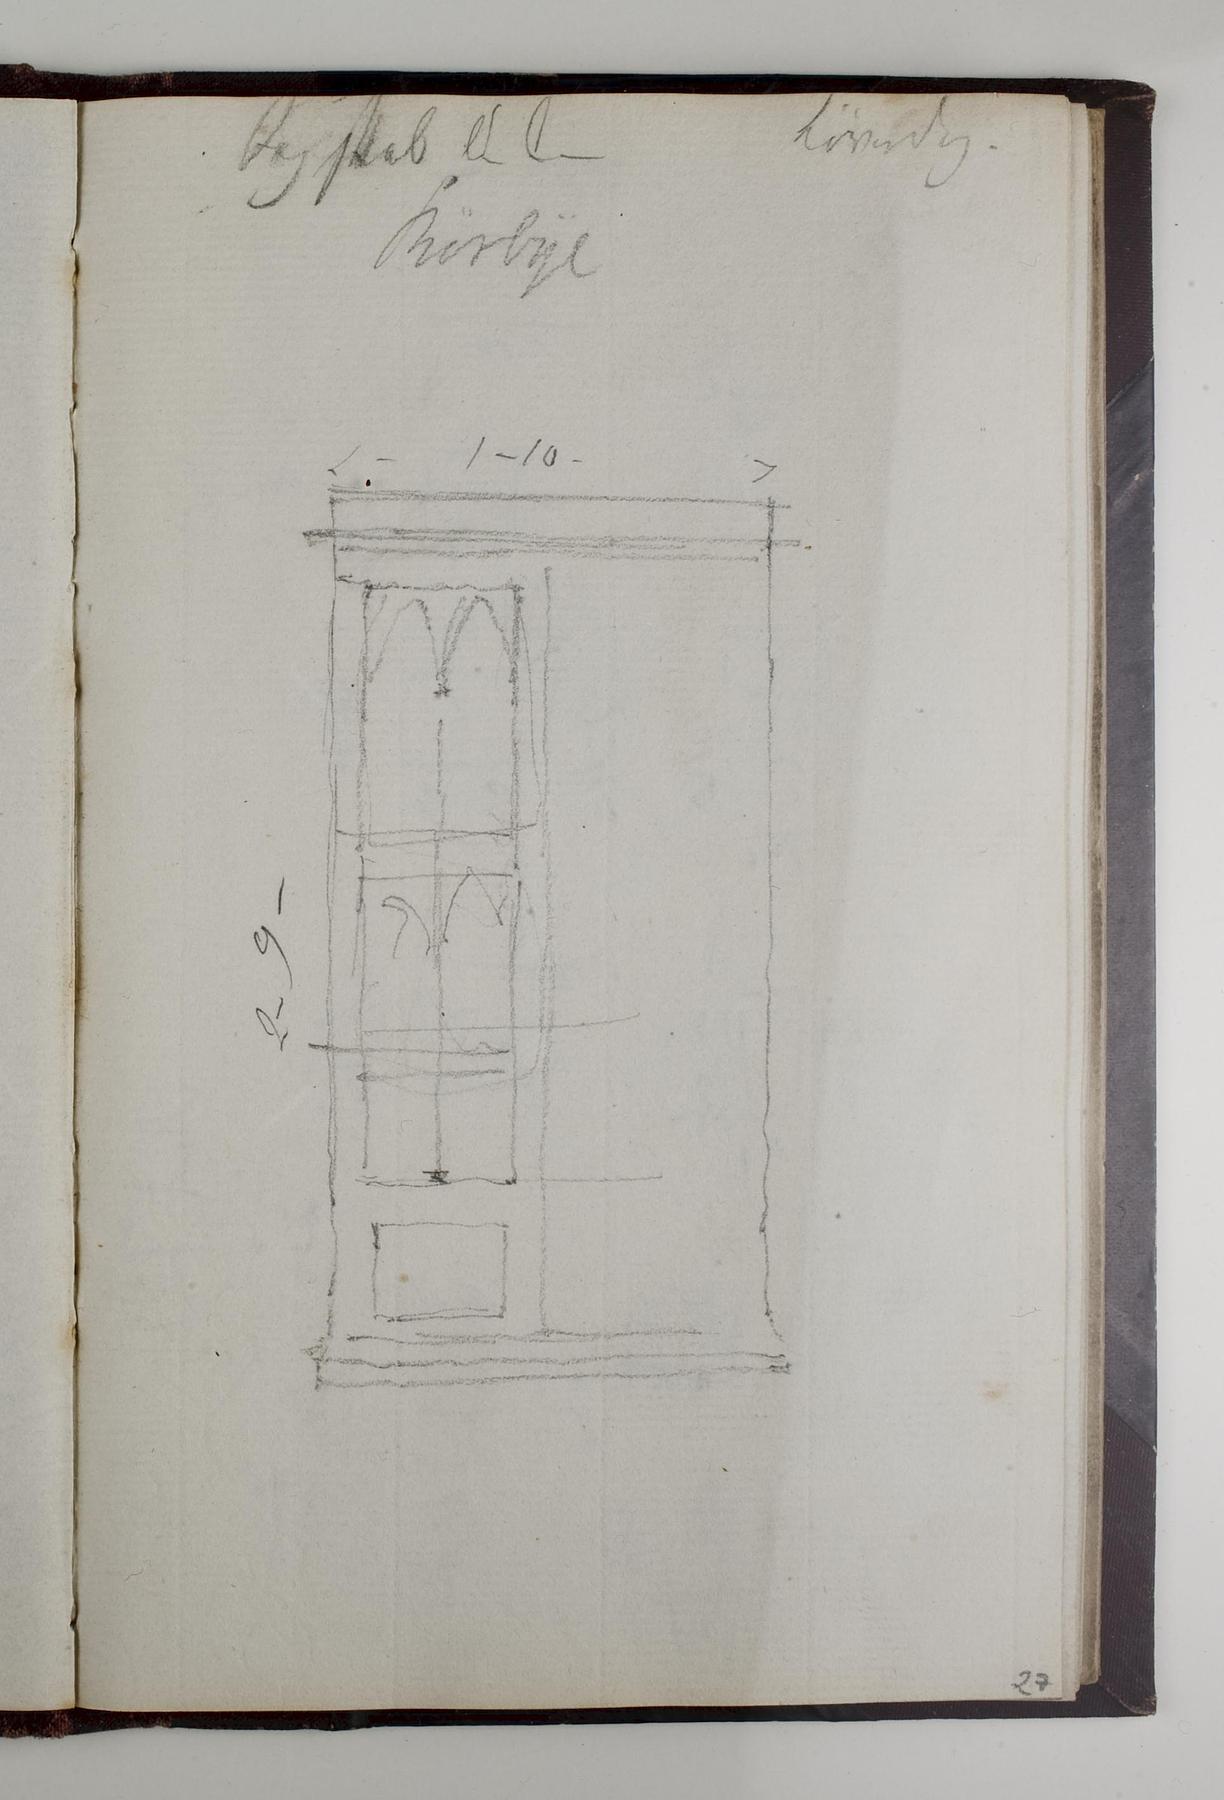 Cabinet with pointed Arch Ornaments on the Door, D1778,27